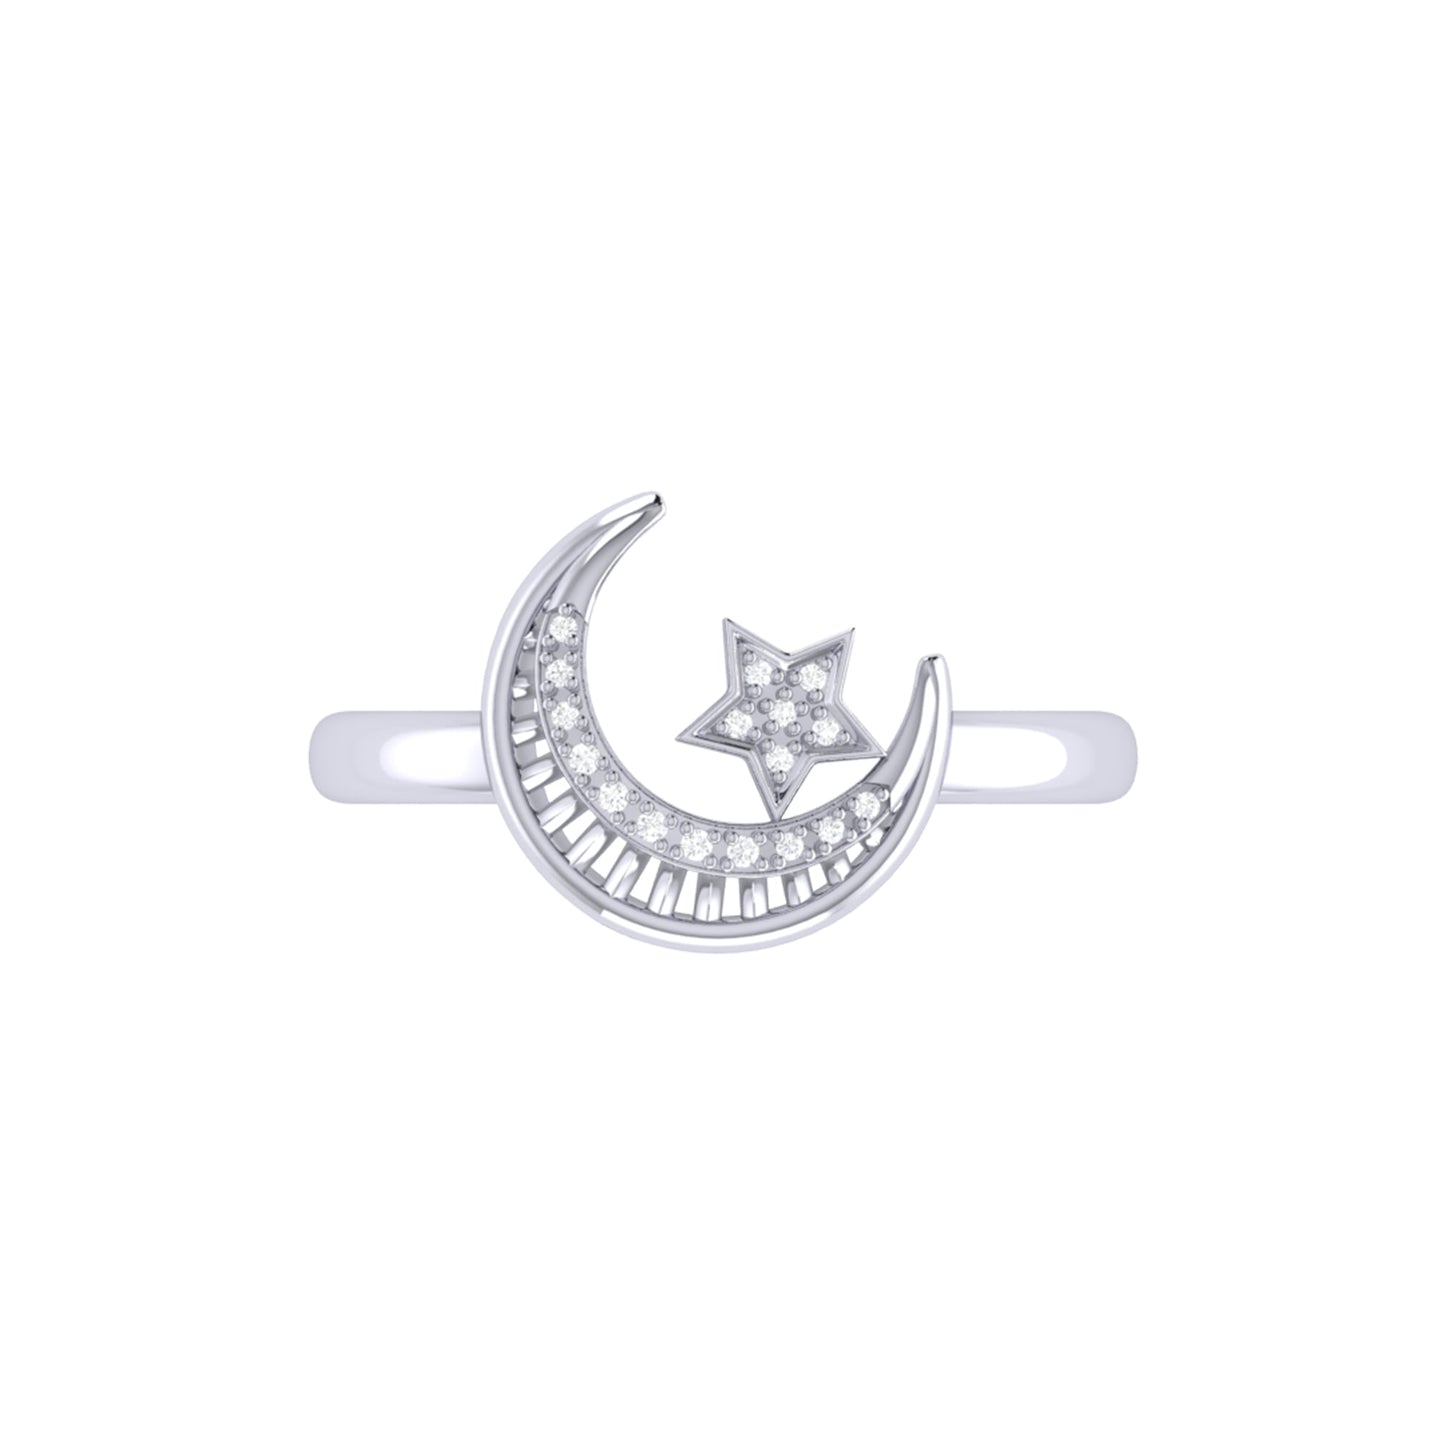 Starkissed Crescent Diamond Ring in Sterling Silver by LuvMyJewelry